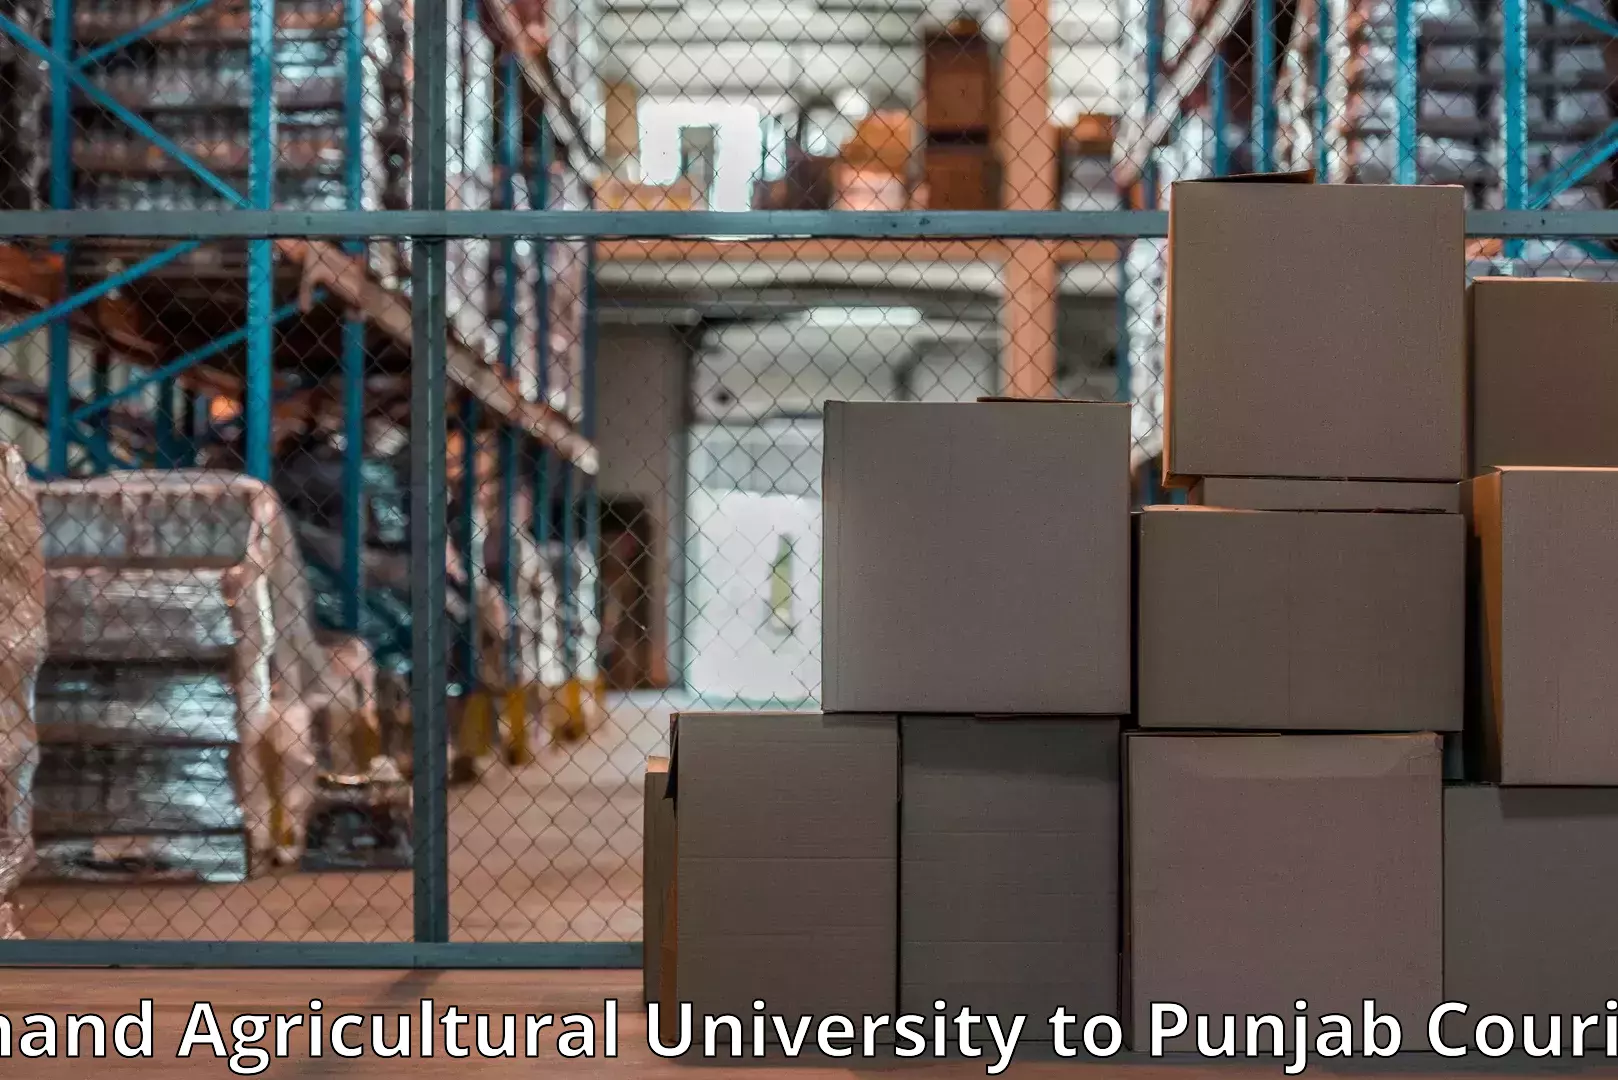 Professional movers and packers Anand Agricultural University to Hoshiarpur